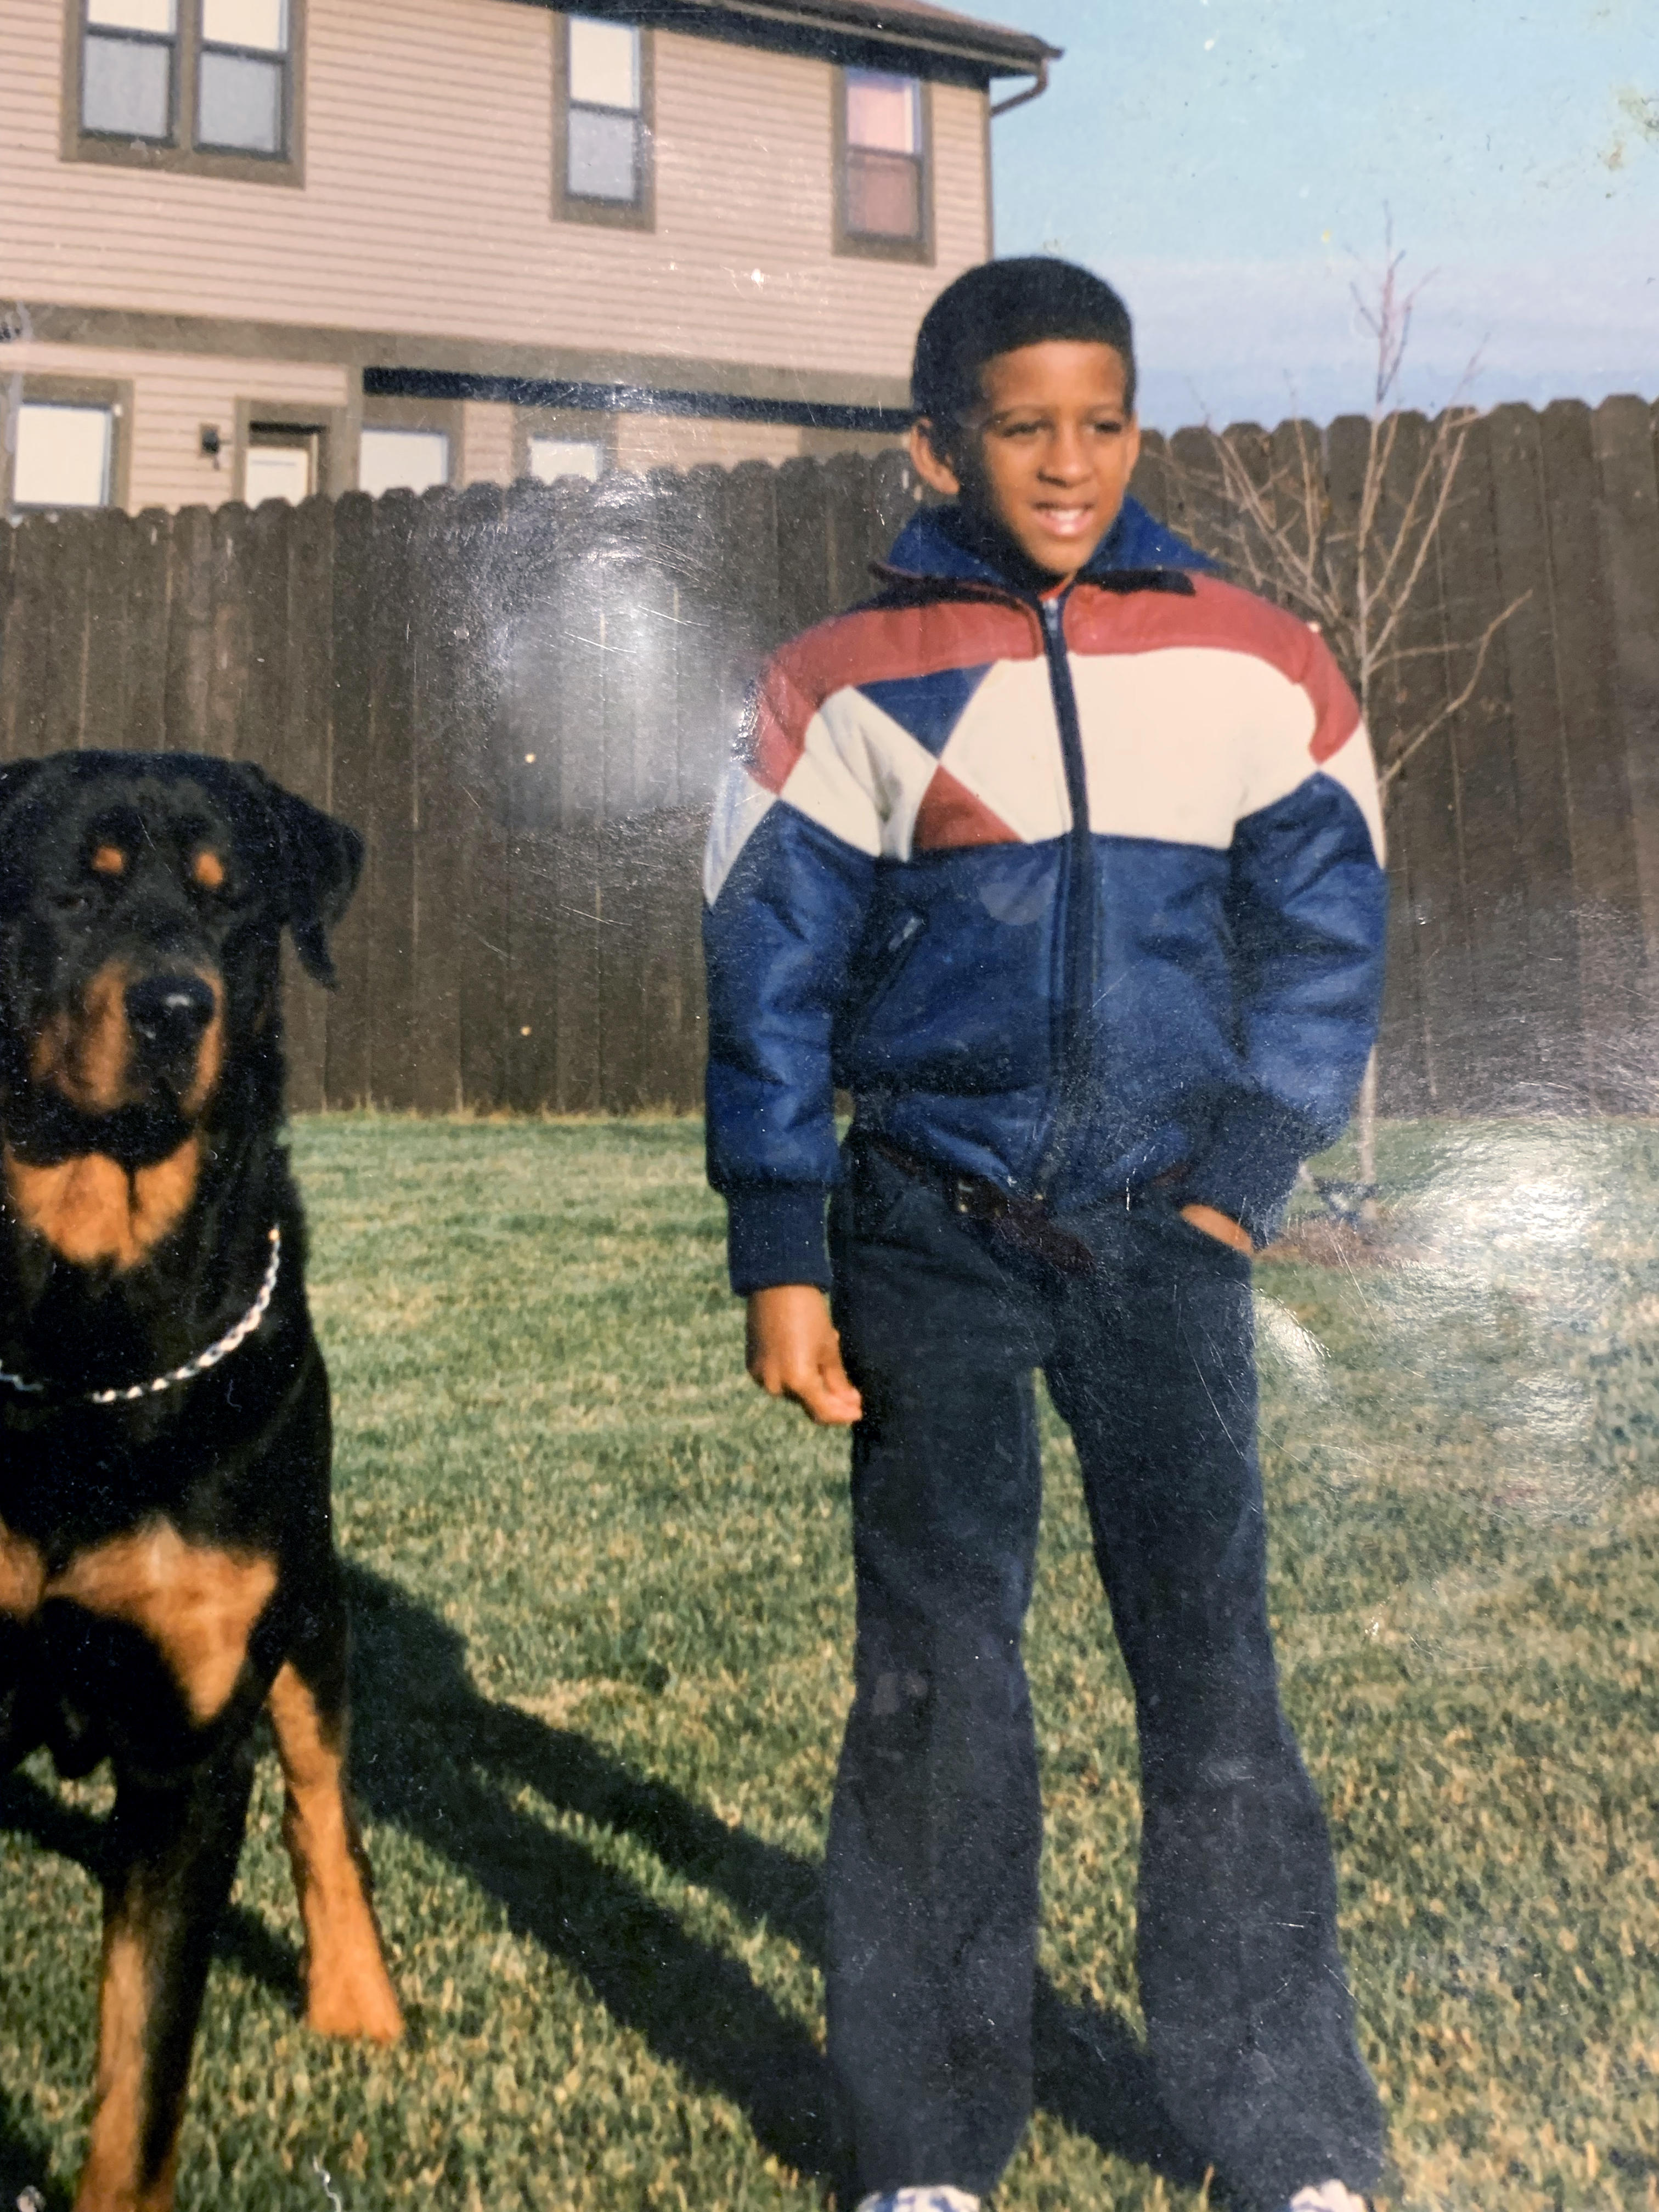 Calvin Booth as a child in a fenced backyard with a large dog, courtesy